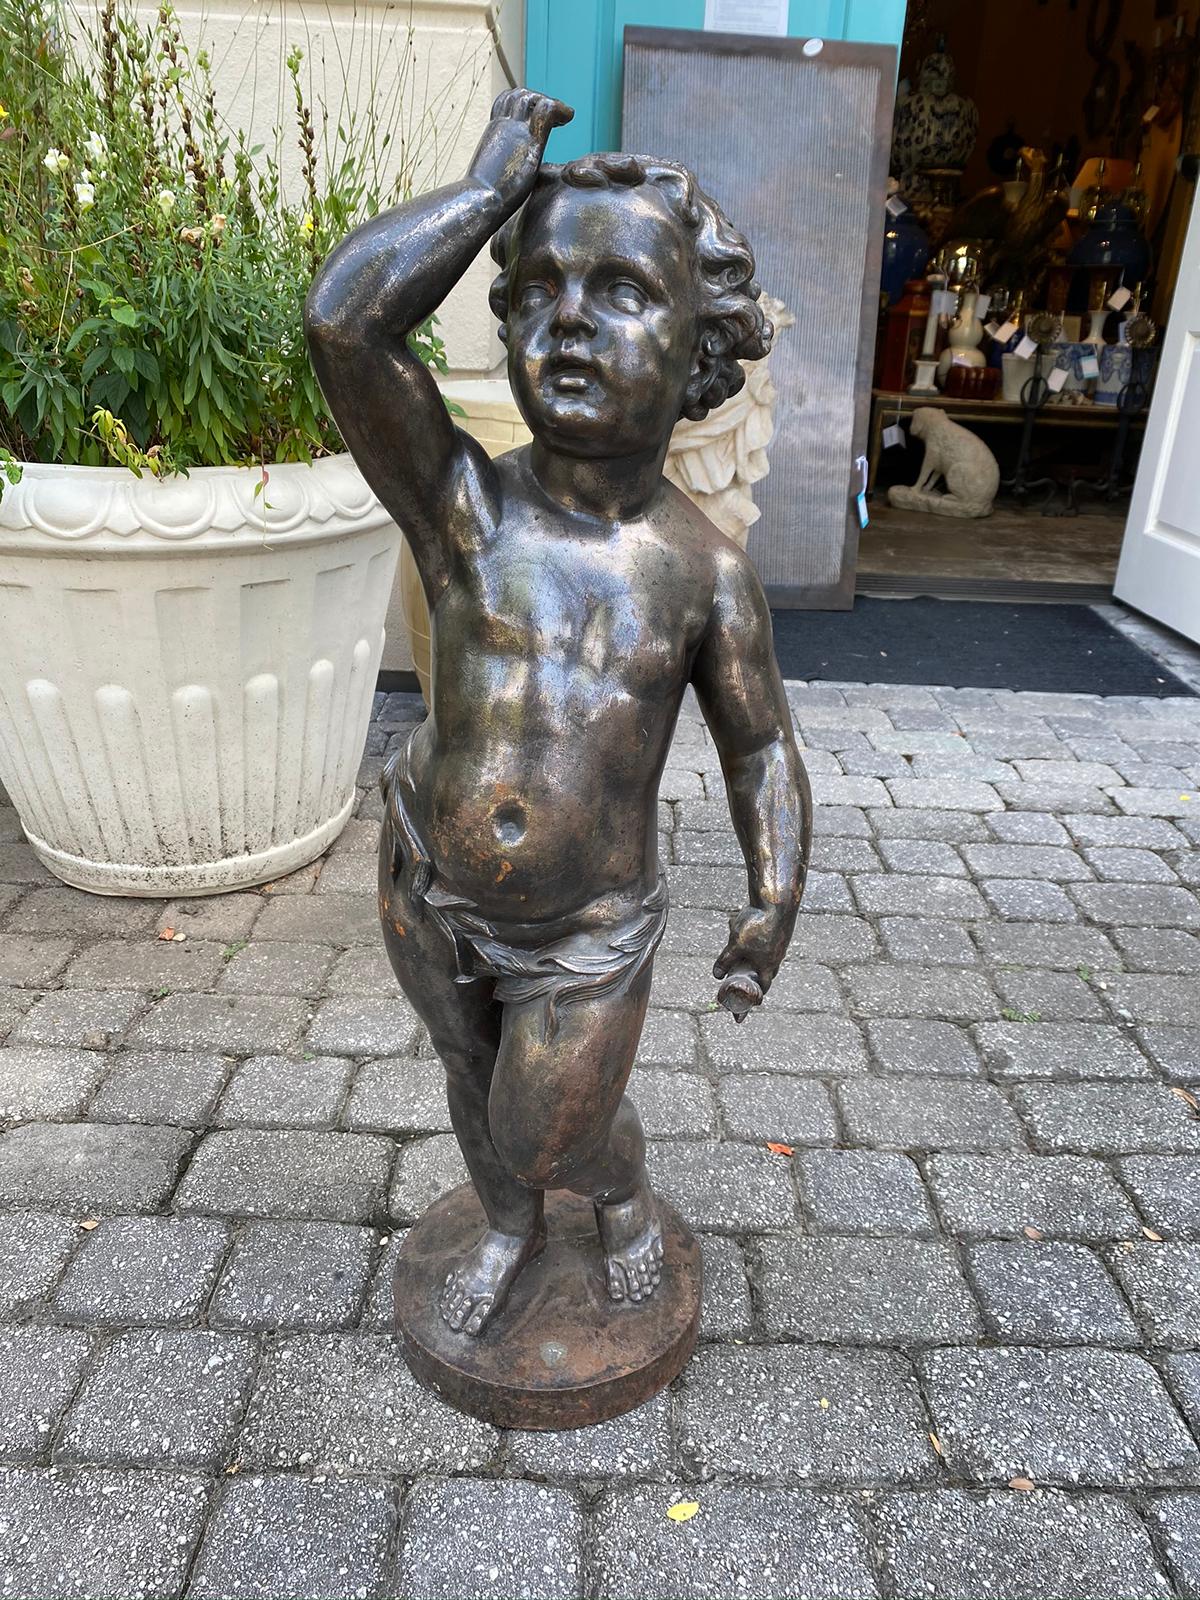 19th-20th century French polished steel statue of child holding flower
Size: Base 11